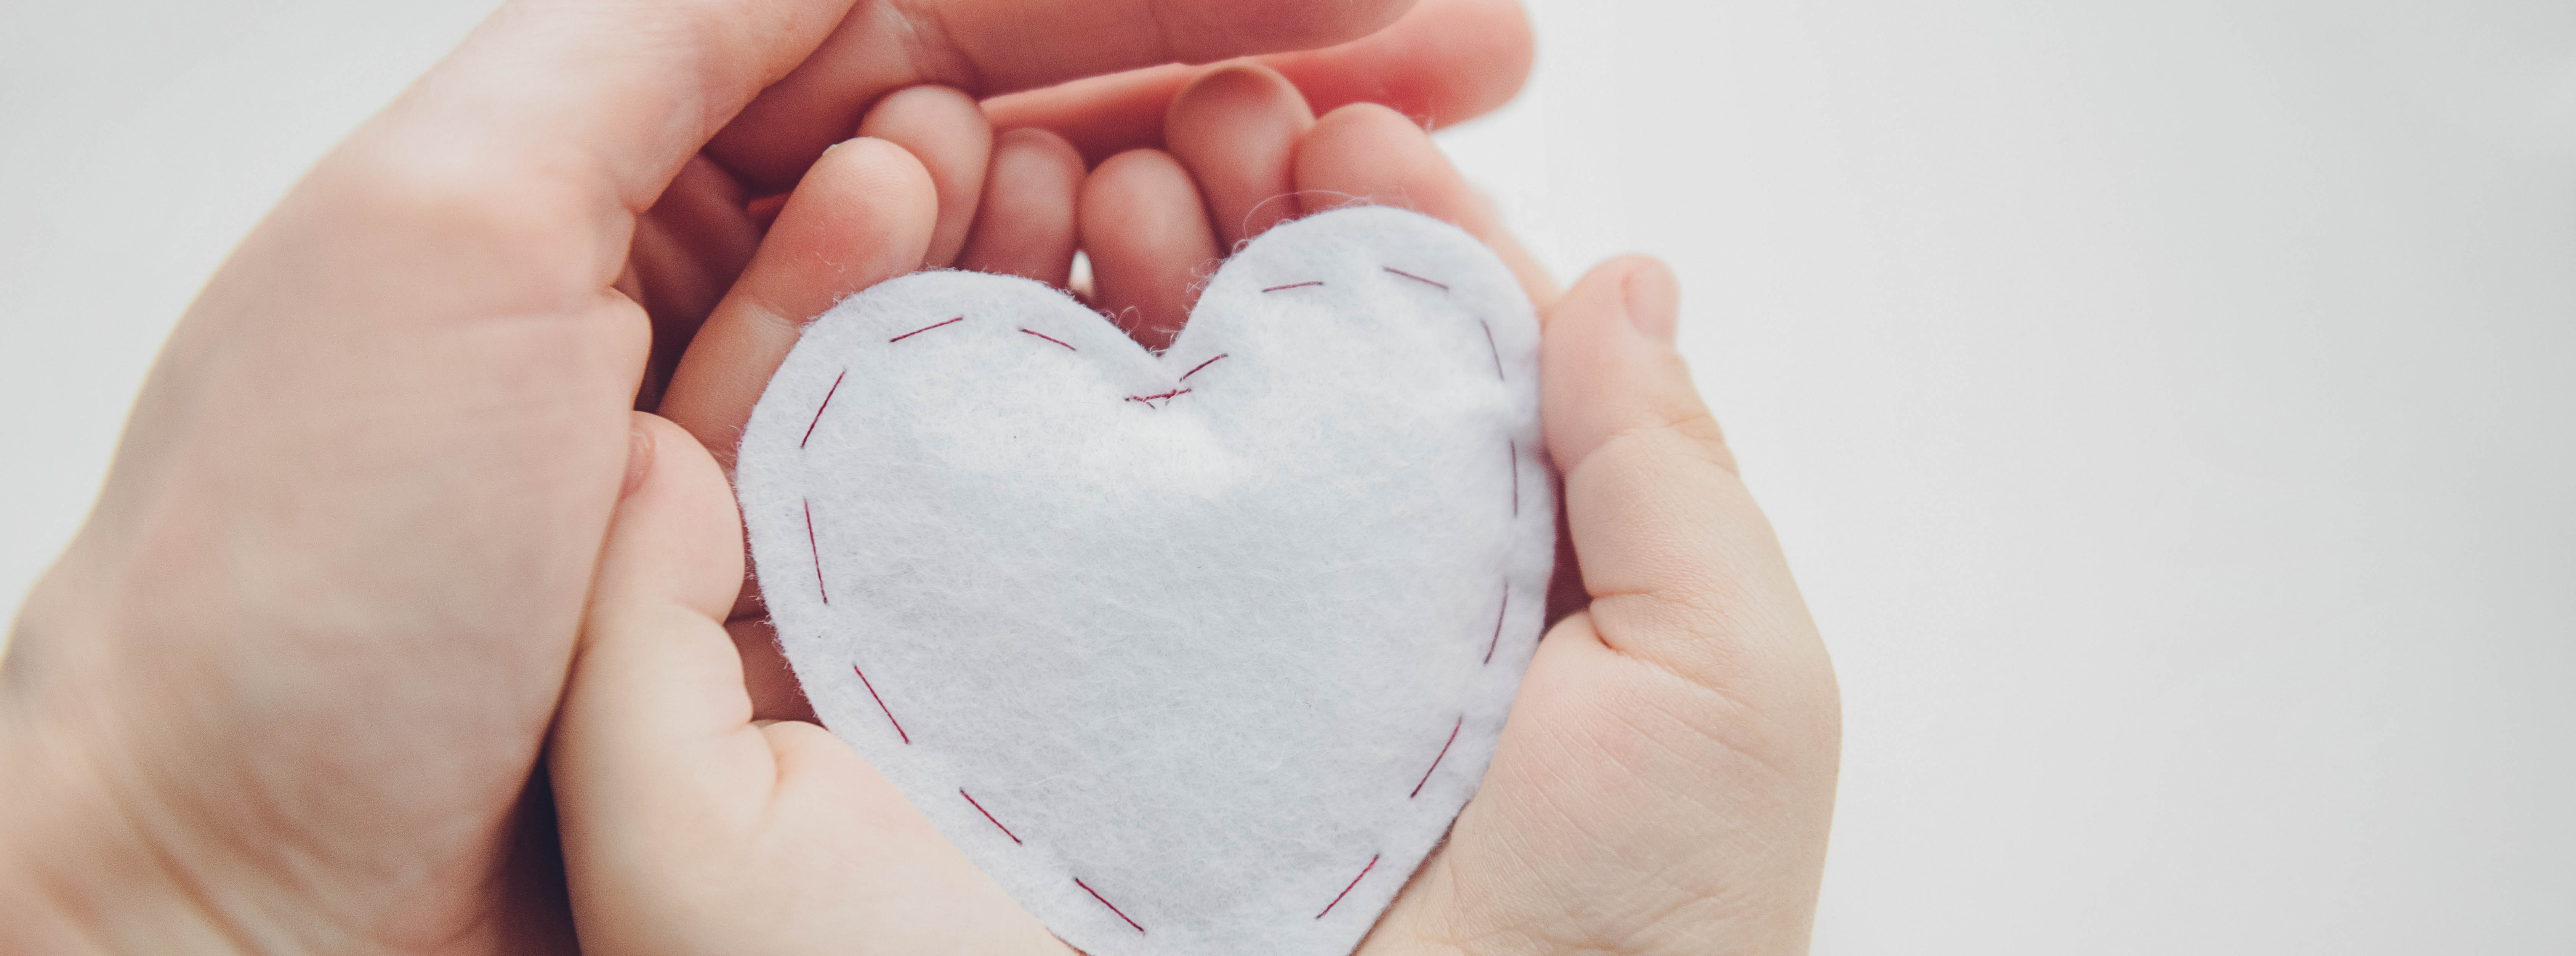 Charitable-Giving_Two-hands-holding-white-heart_660x245